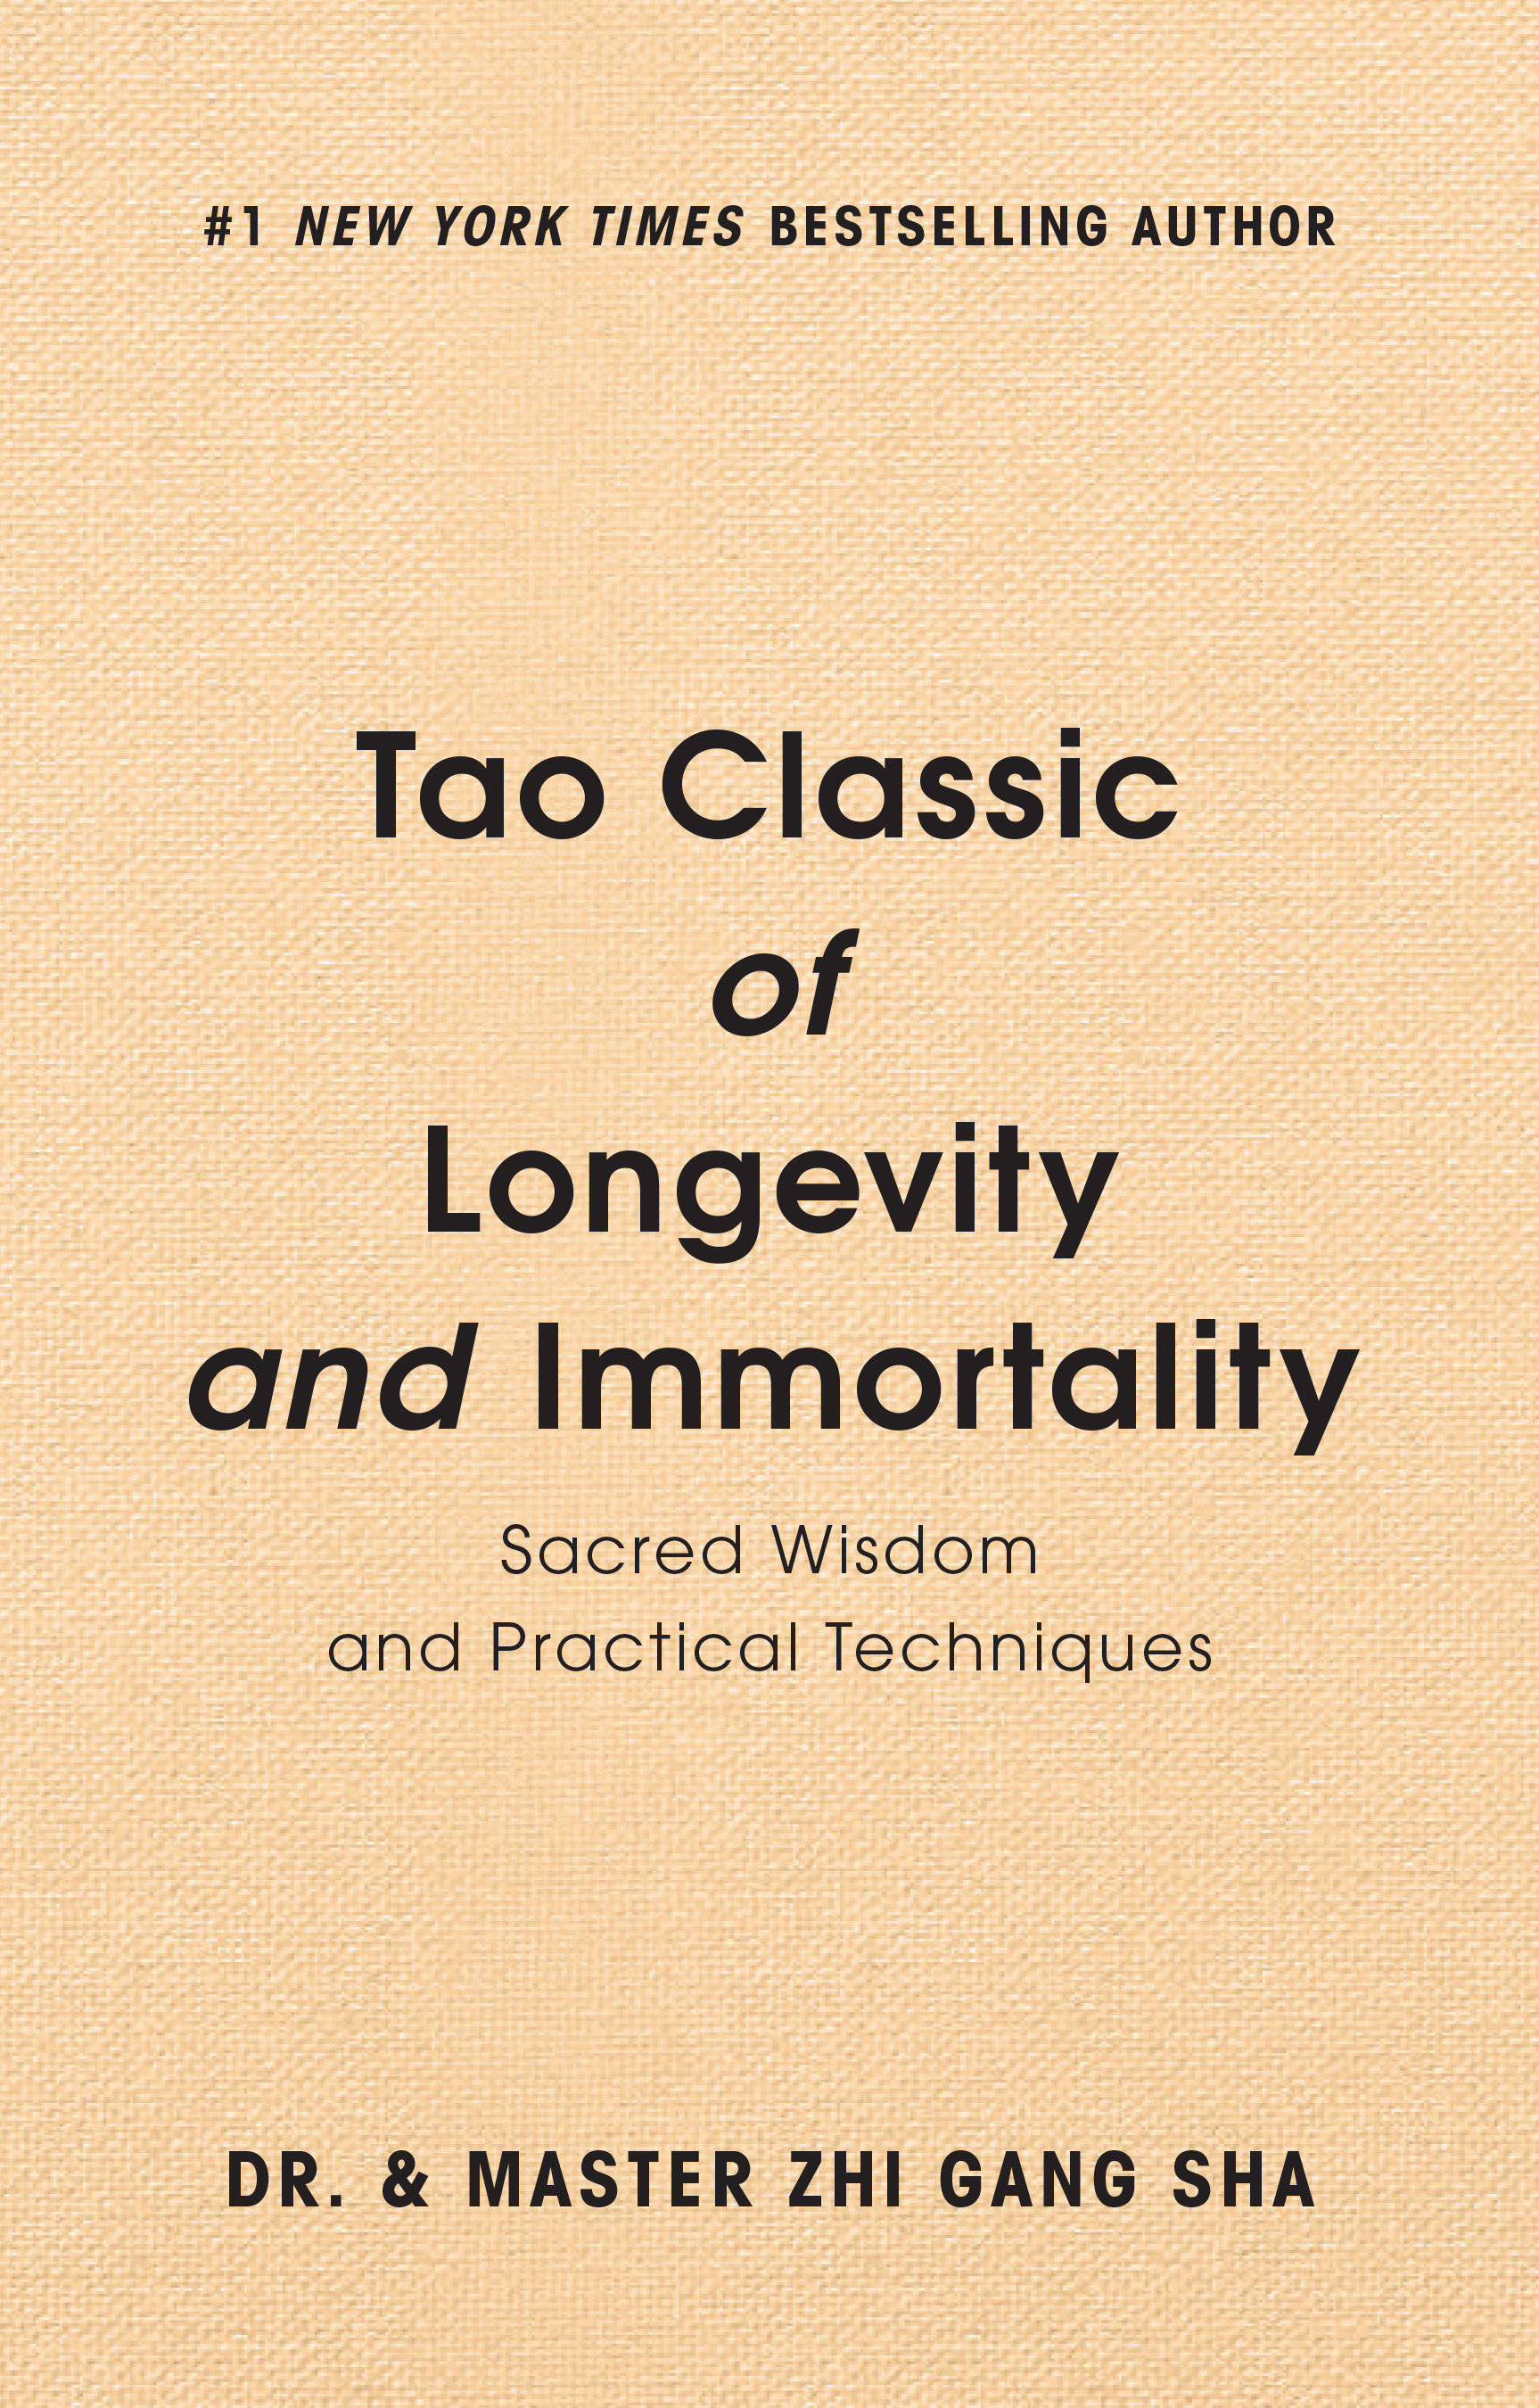 Tao Classic Of Longevity And Immortality (Hardcover Book)